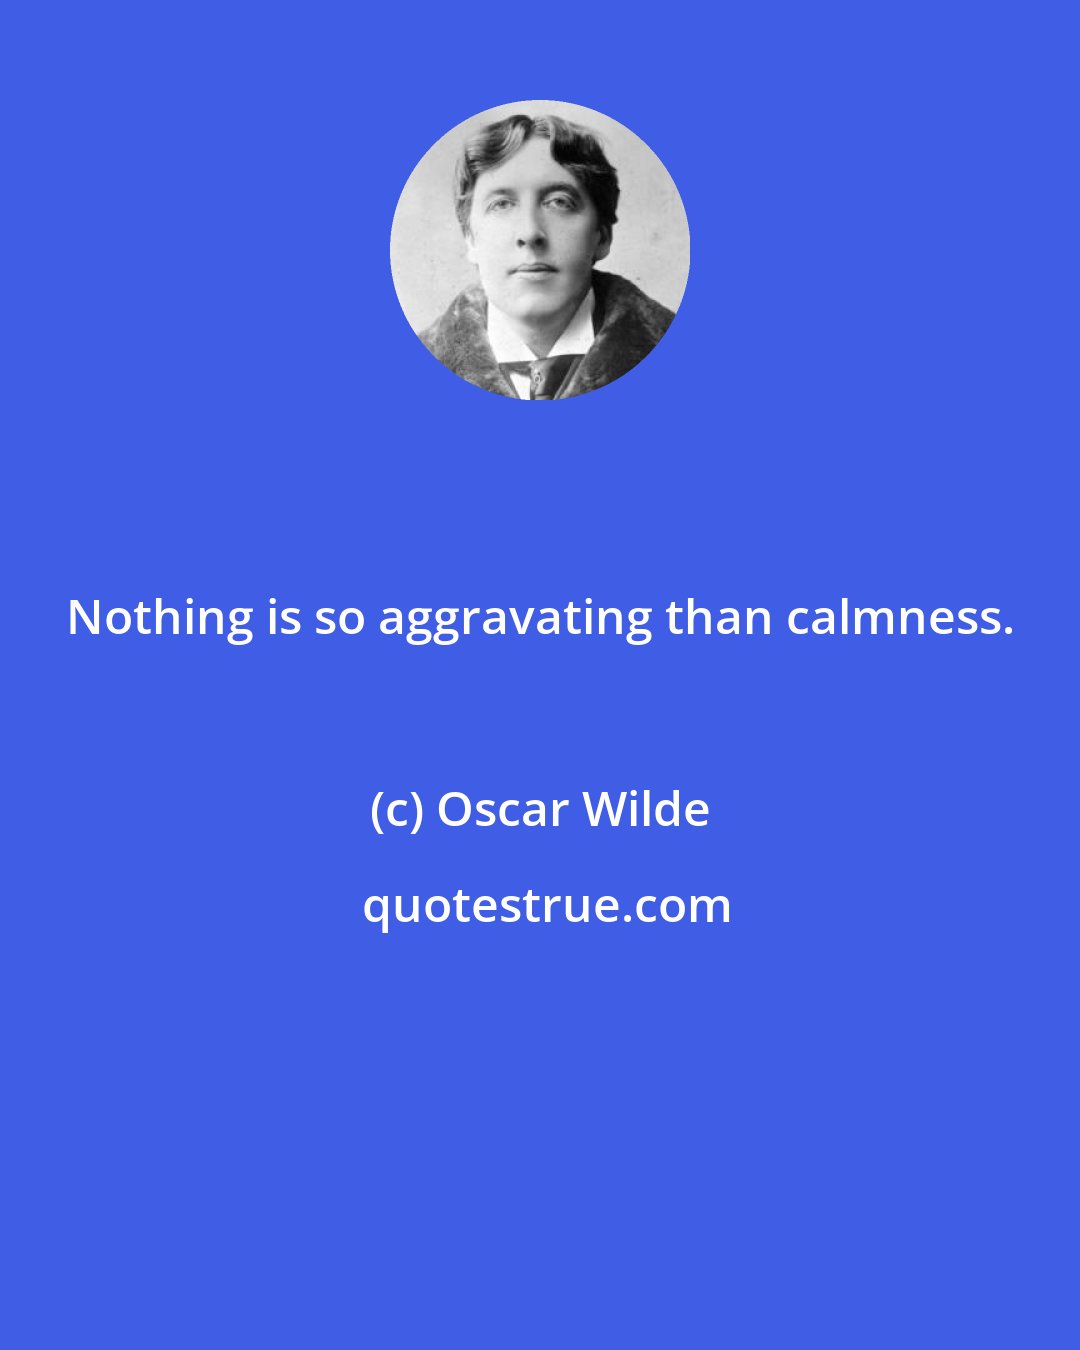 Oscar Wilde: Nothing is so aggravating than calmness.